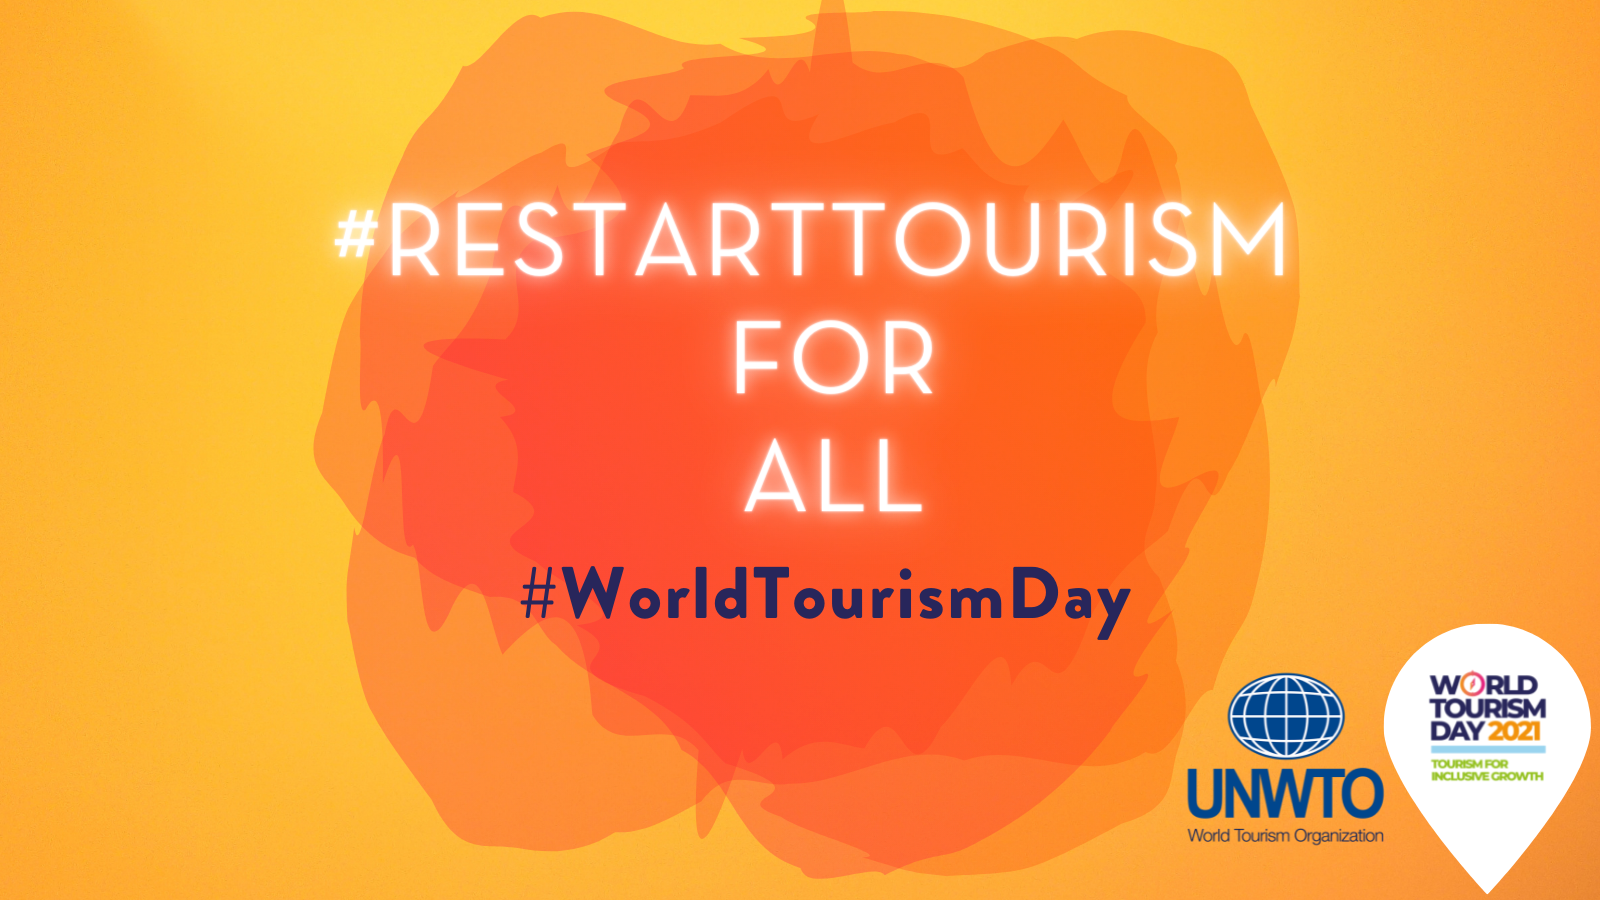 ISTO and ISTO Americas joined the celebrations of World Tourism Day 2021